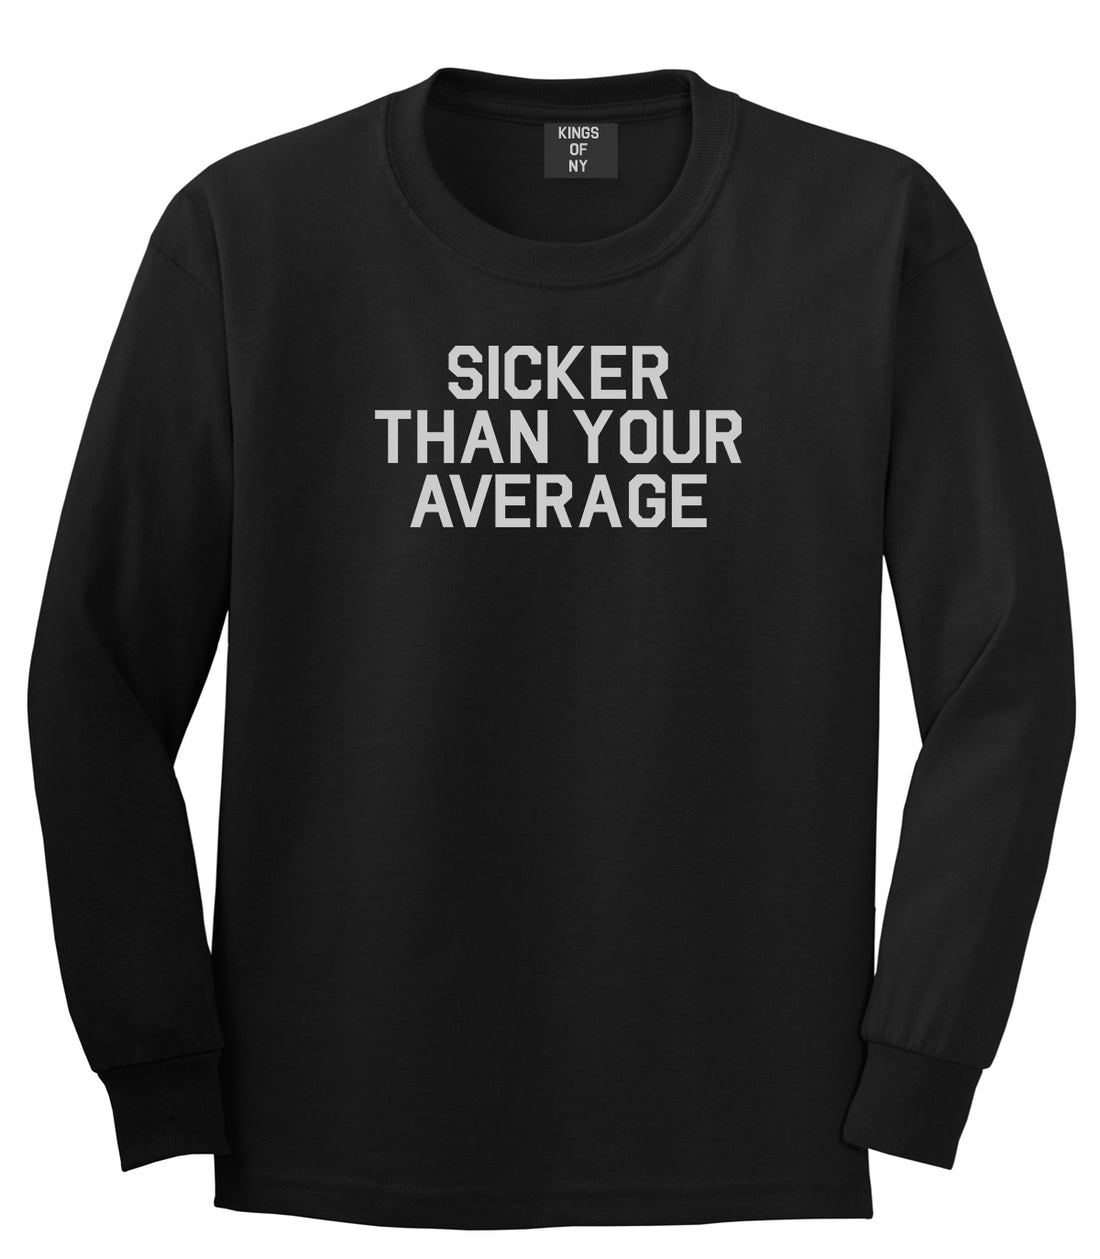 Sicker Than Your Average Long Sleeve T-Shirt in Black